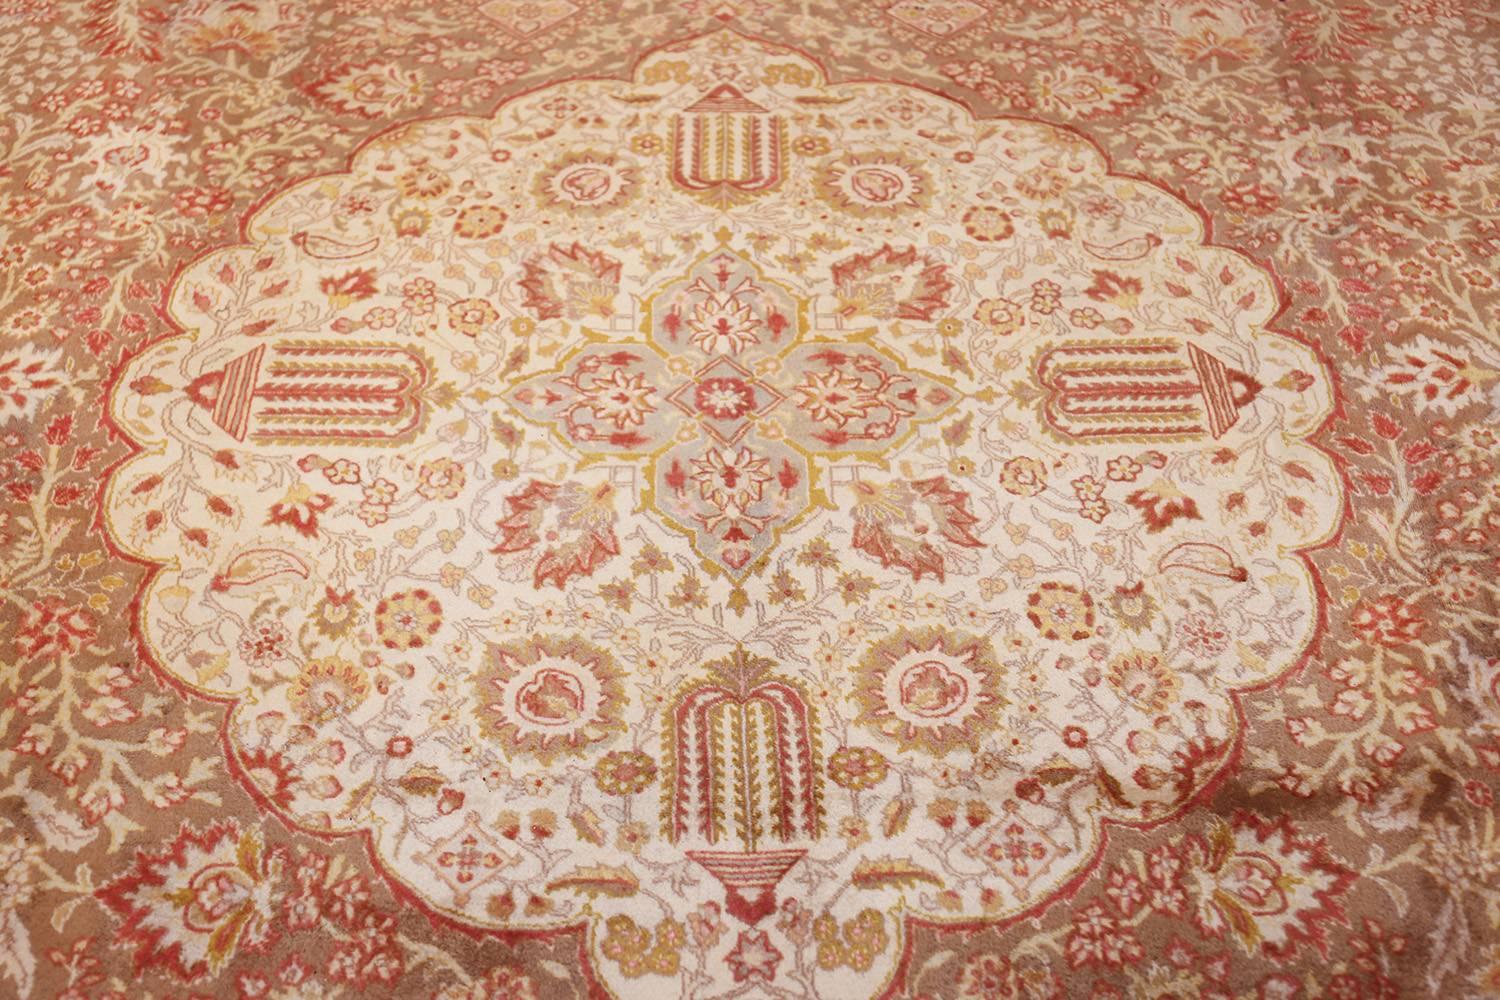 Finely woven vintage room sized Tabriz carpet, country of origin: Persia, date circa mid-20th century. Size: 9 ft 9 in x 13 ft (2.97 m x 3.96 m). Traditional floral elements blend well with passionate colors and flowing tones in this classically